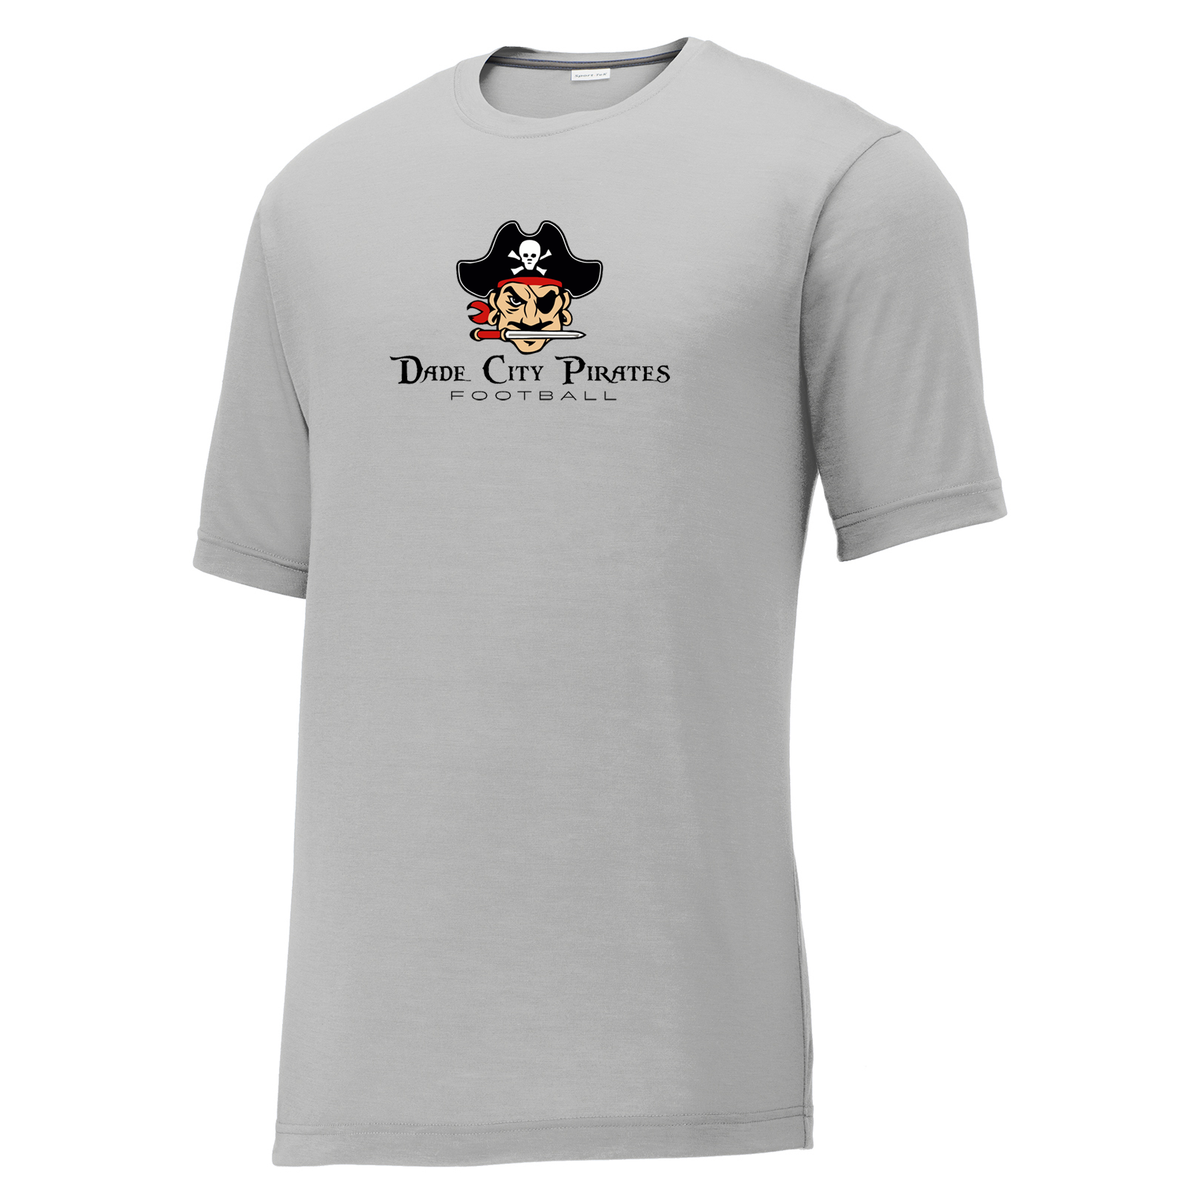 Dade City Pirates  CottonTouch Performance T-Shirt